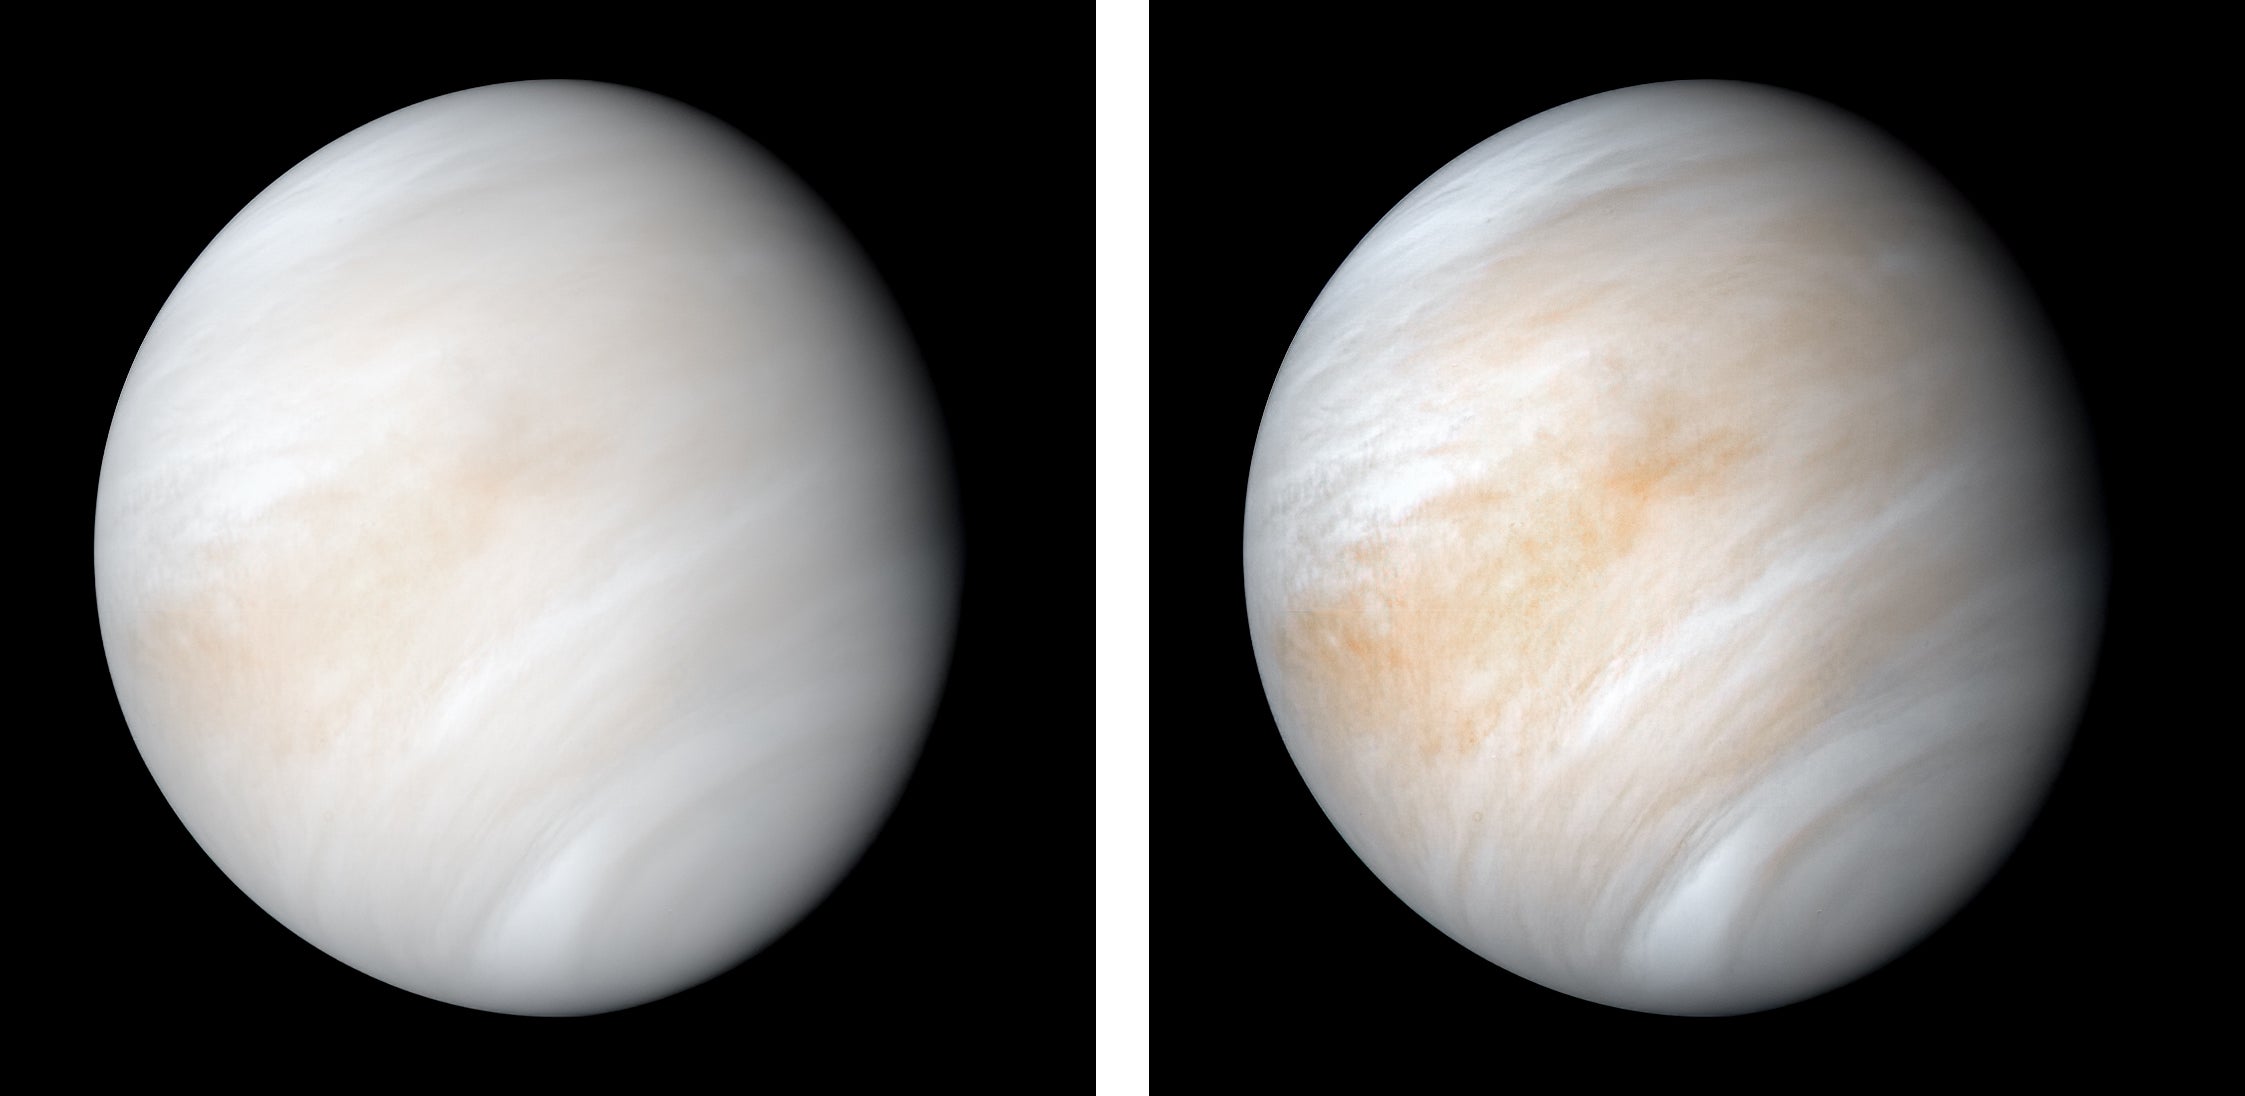 An image of Venus taken by Mariner 10 in 1974 (left) and a recently enhanced version of the same image (right). (Image: NASA/JPL-Caltech)